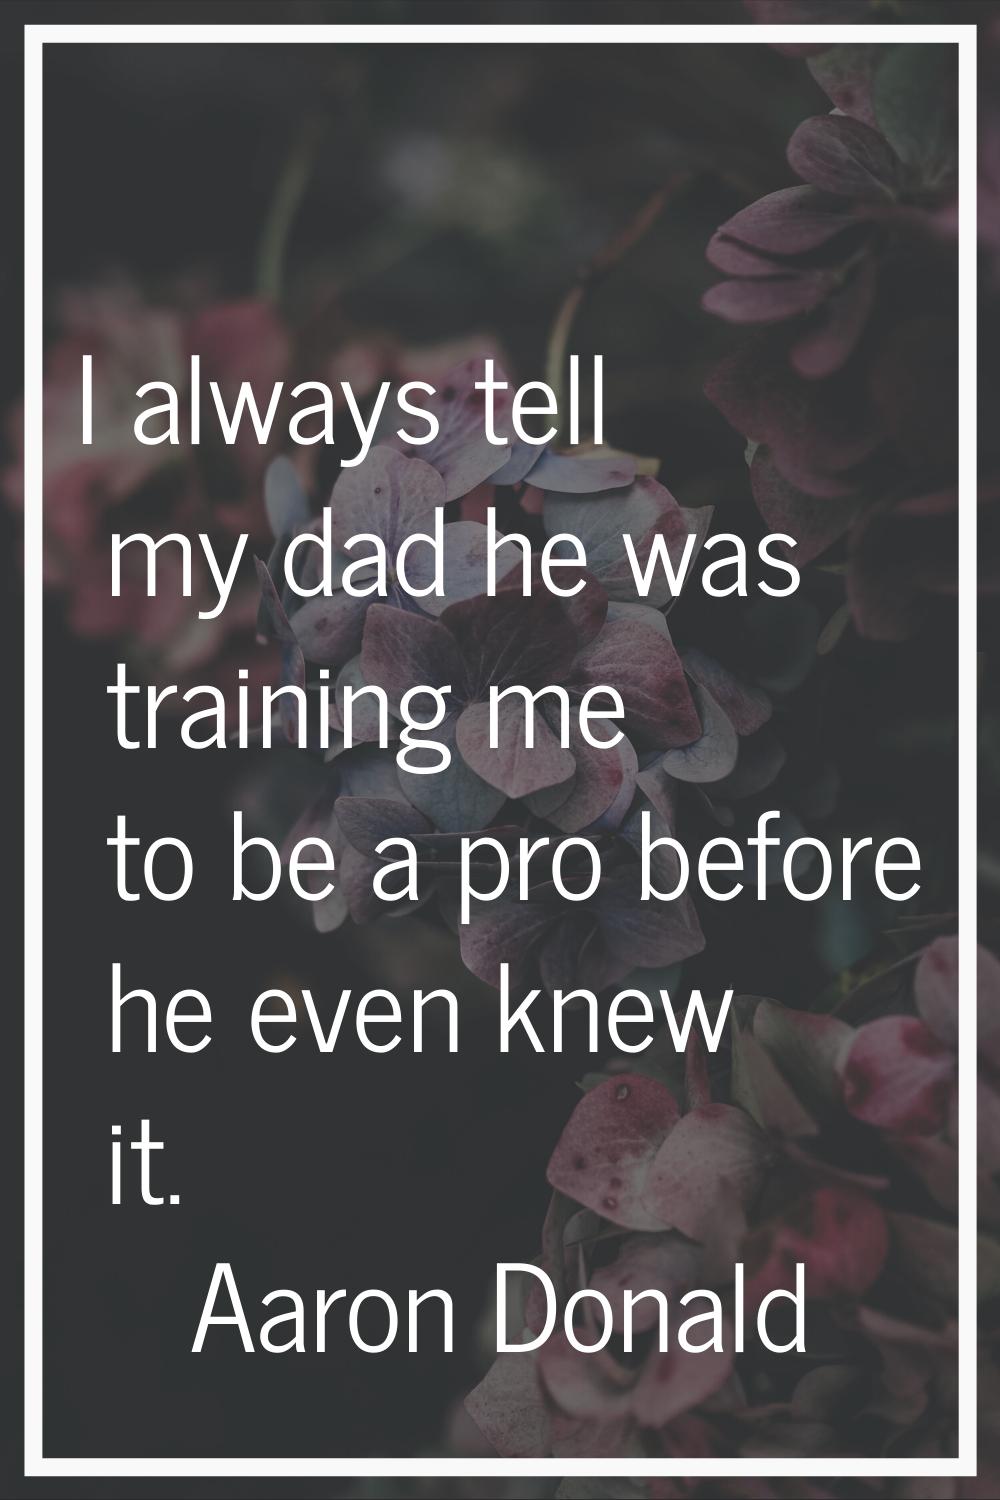 I always tell my dad he was training me to be a pro before he even knew it.